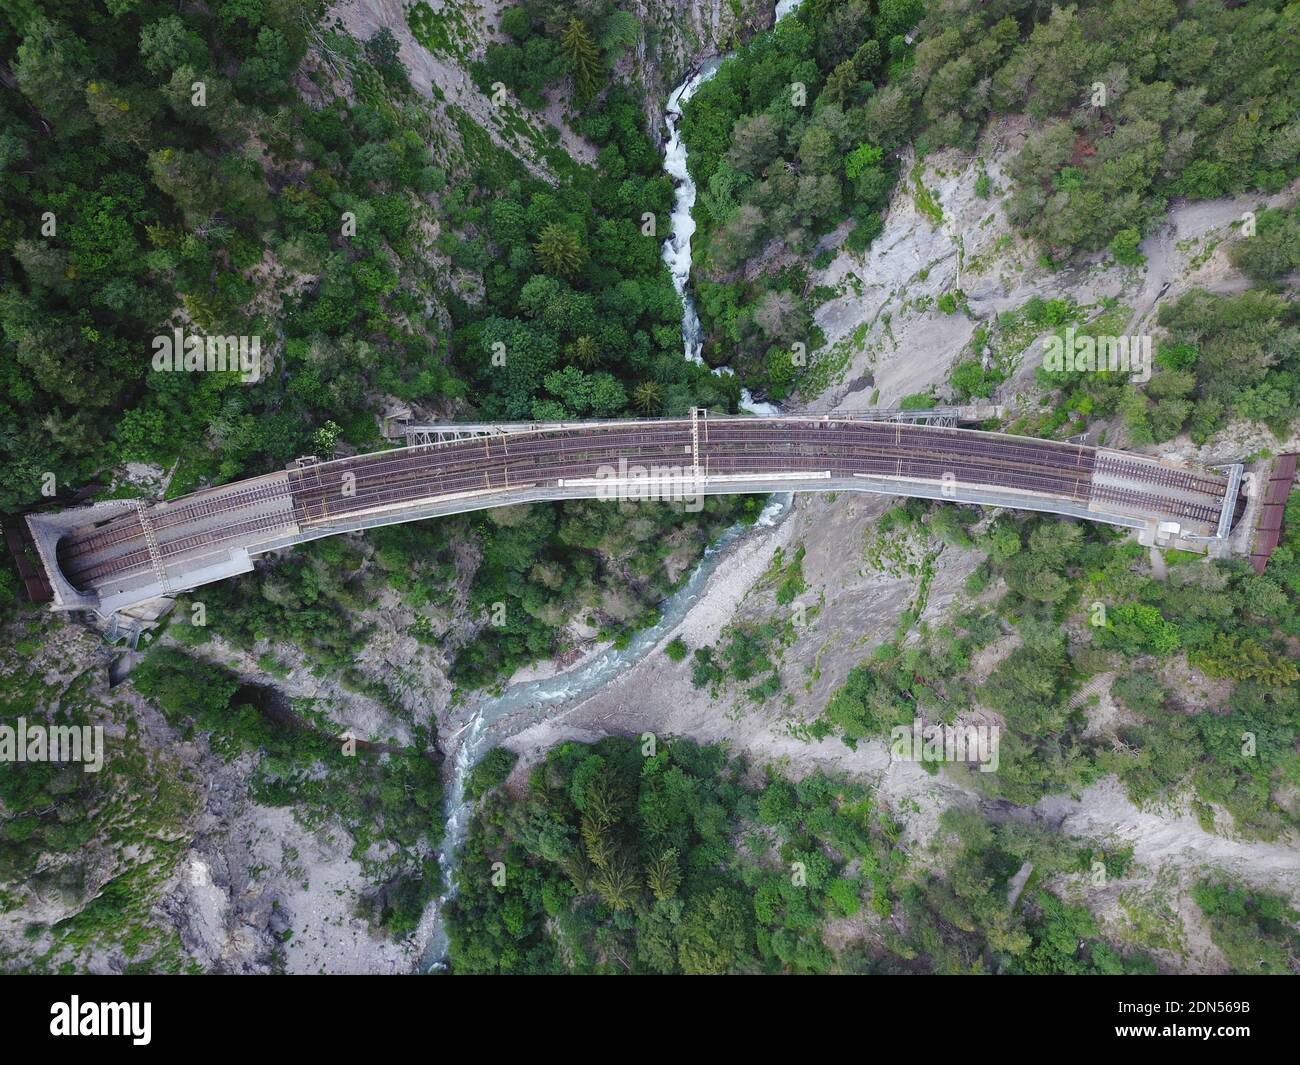 High Angle View Of Bridge Over Road Amidst Trees Stock Photo